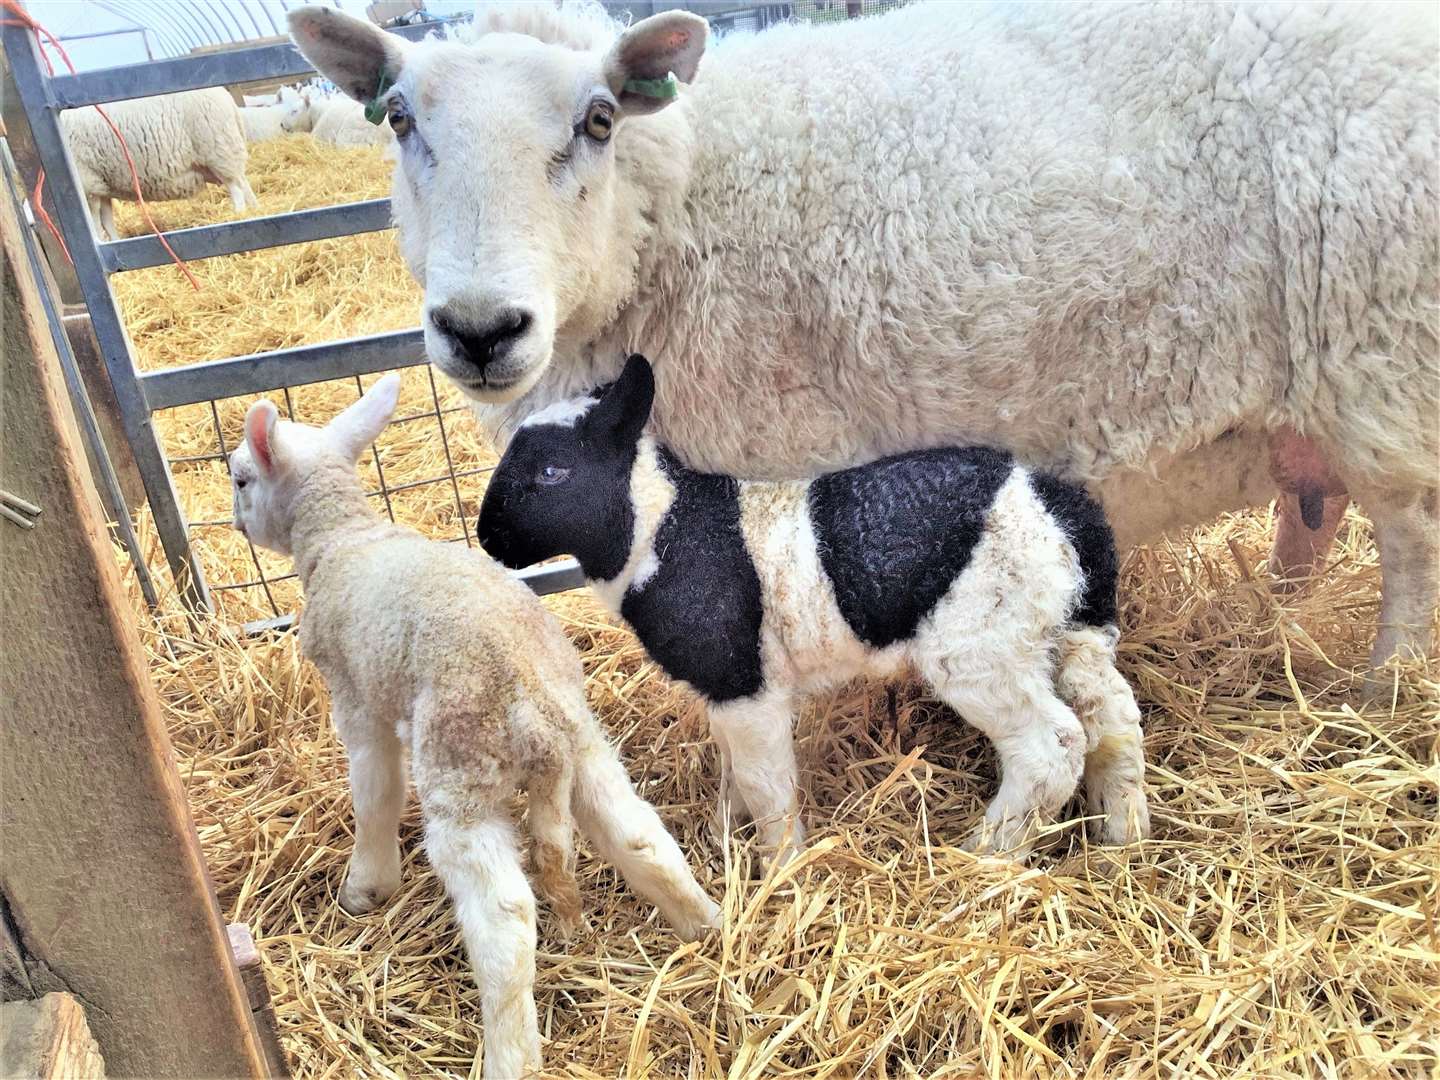 The lamb looks very different from his mother and sibling.